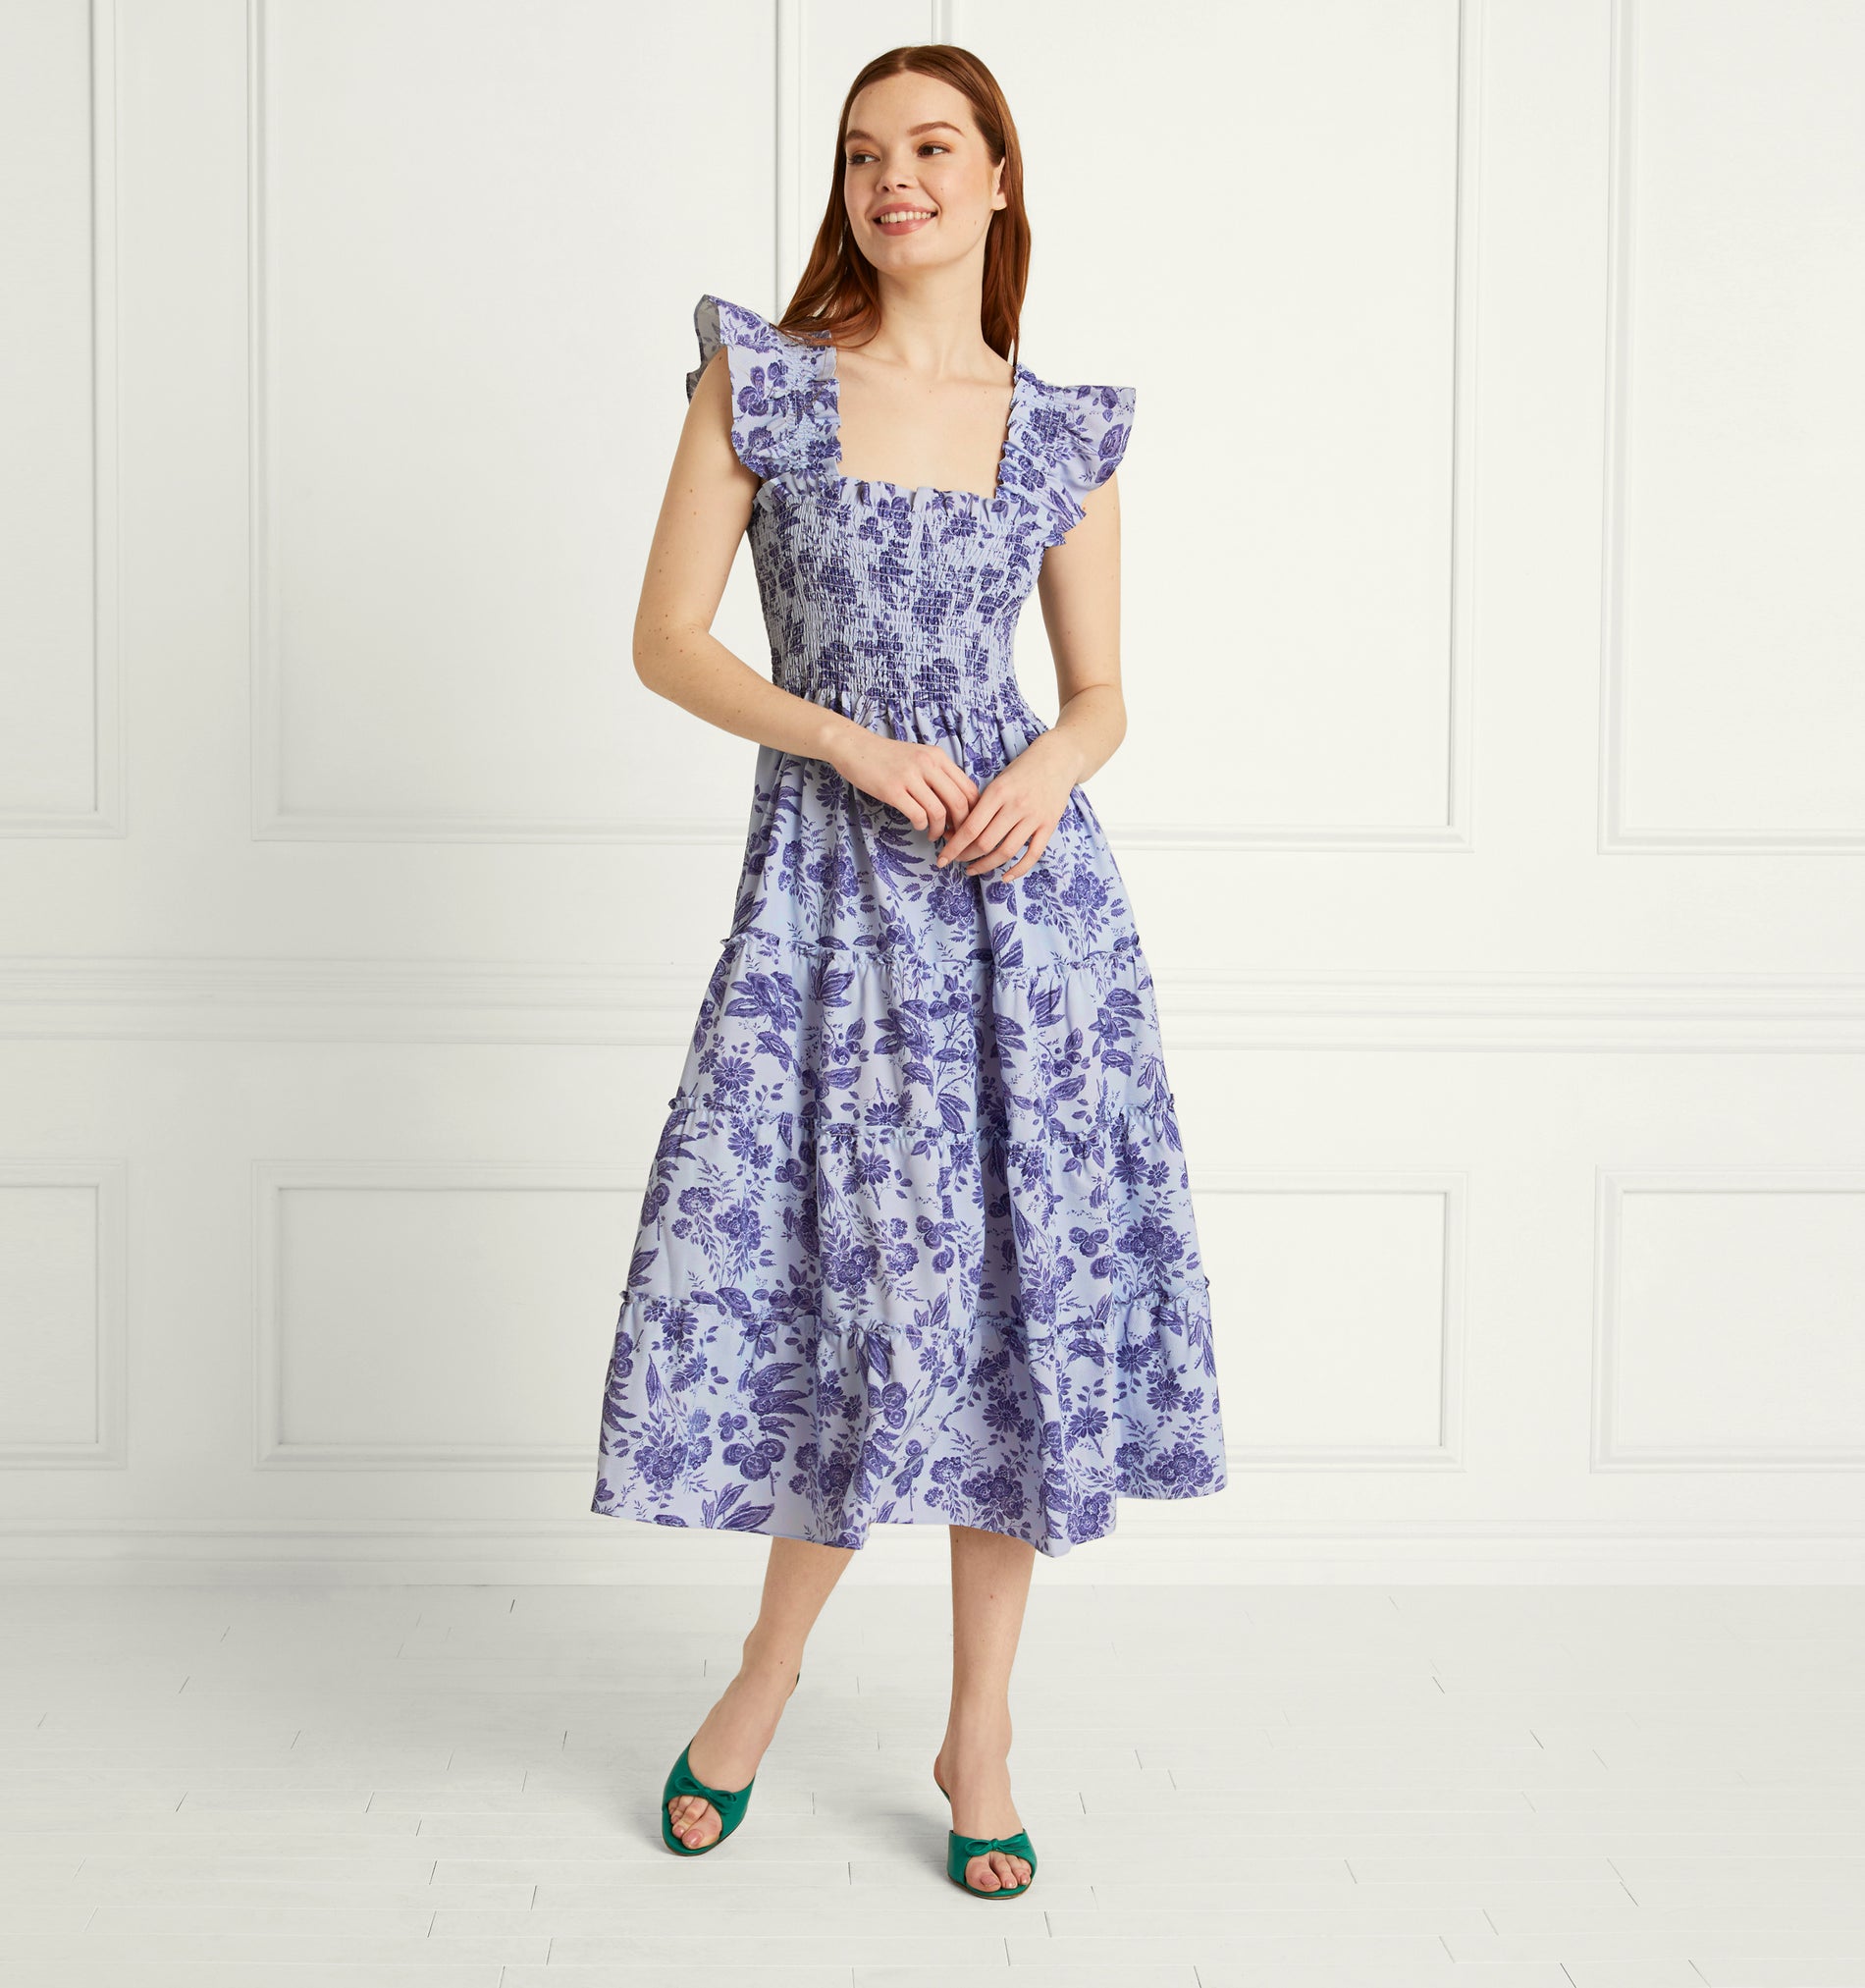 Floral Bell Sleeve Dress by Draper James for $38